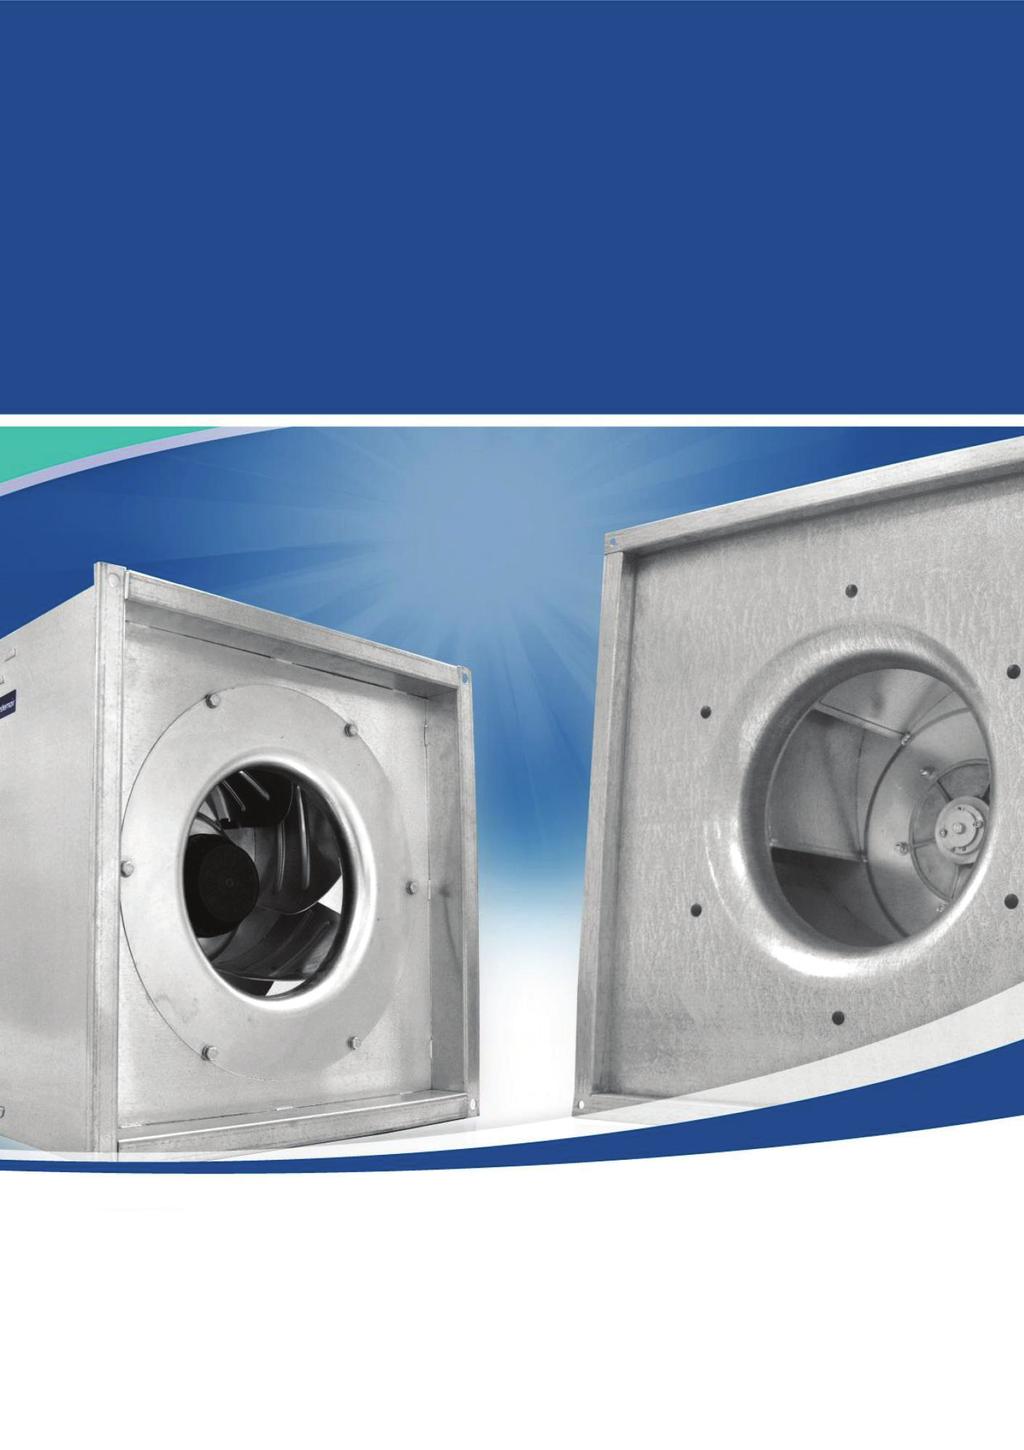 Fans Air Handling Units Air Distribution Products Fire Safety Air Curtains and heating Products Tunnel Fans The Straight Way Rectangular Cabinet Fan Systemair India Pvt. Ltd.